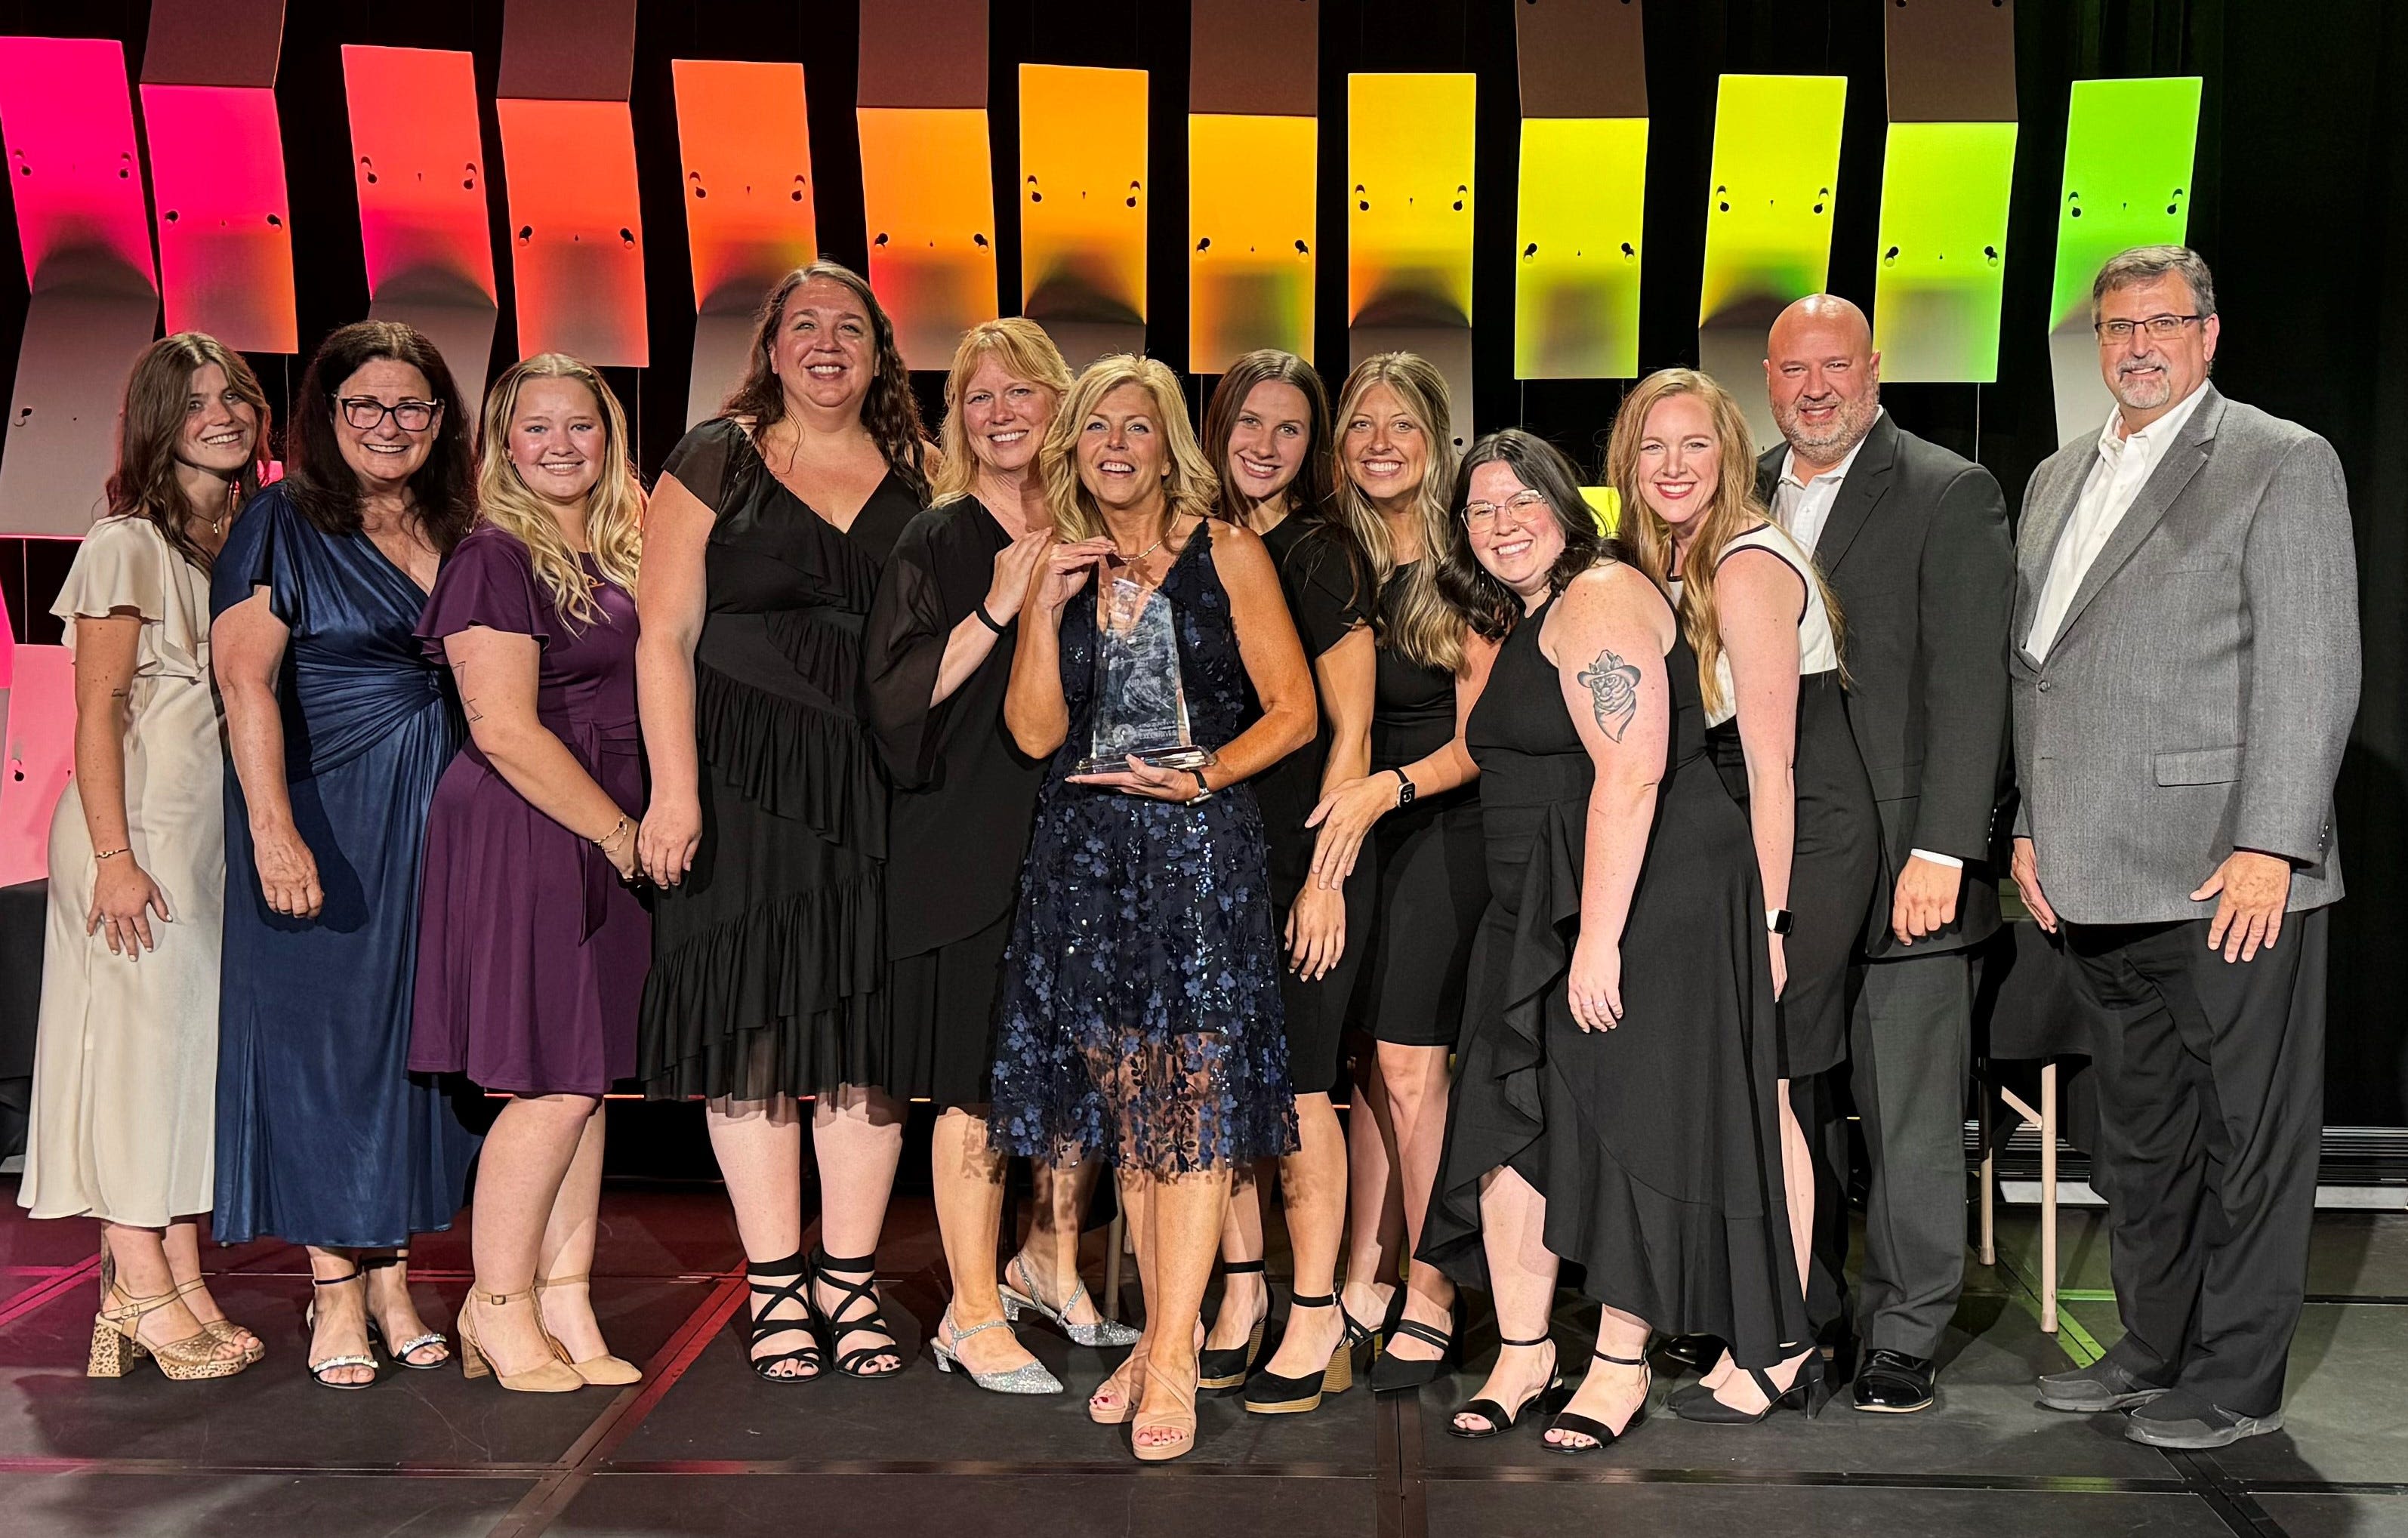 Fox Cities Chamber brings home the gold, named best chamber of its size